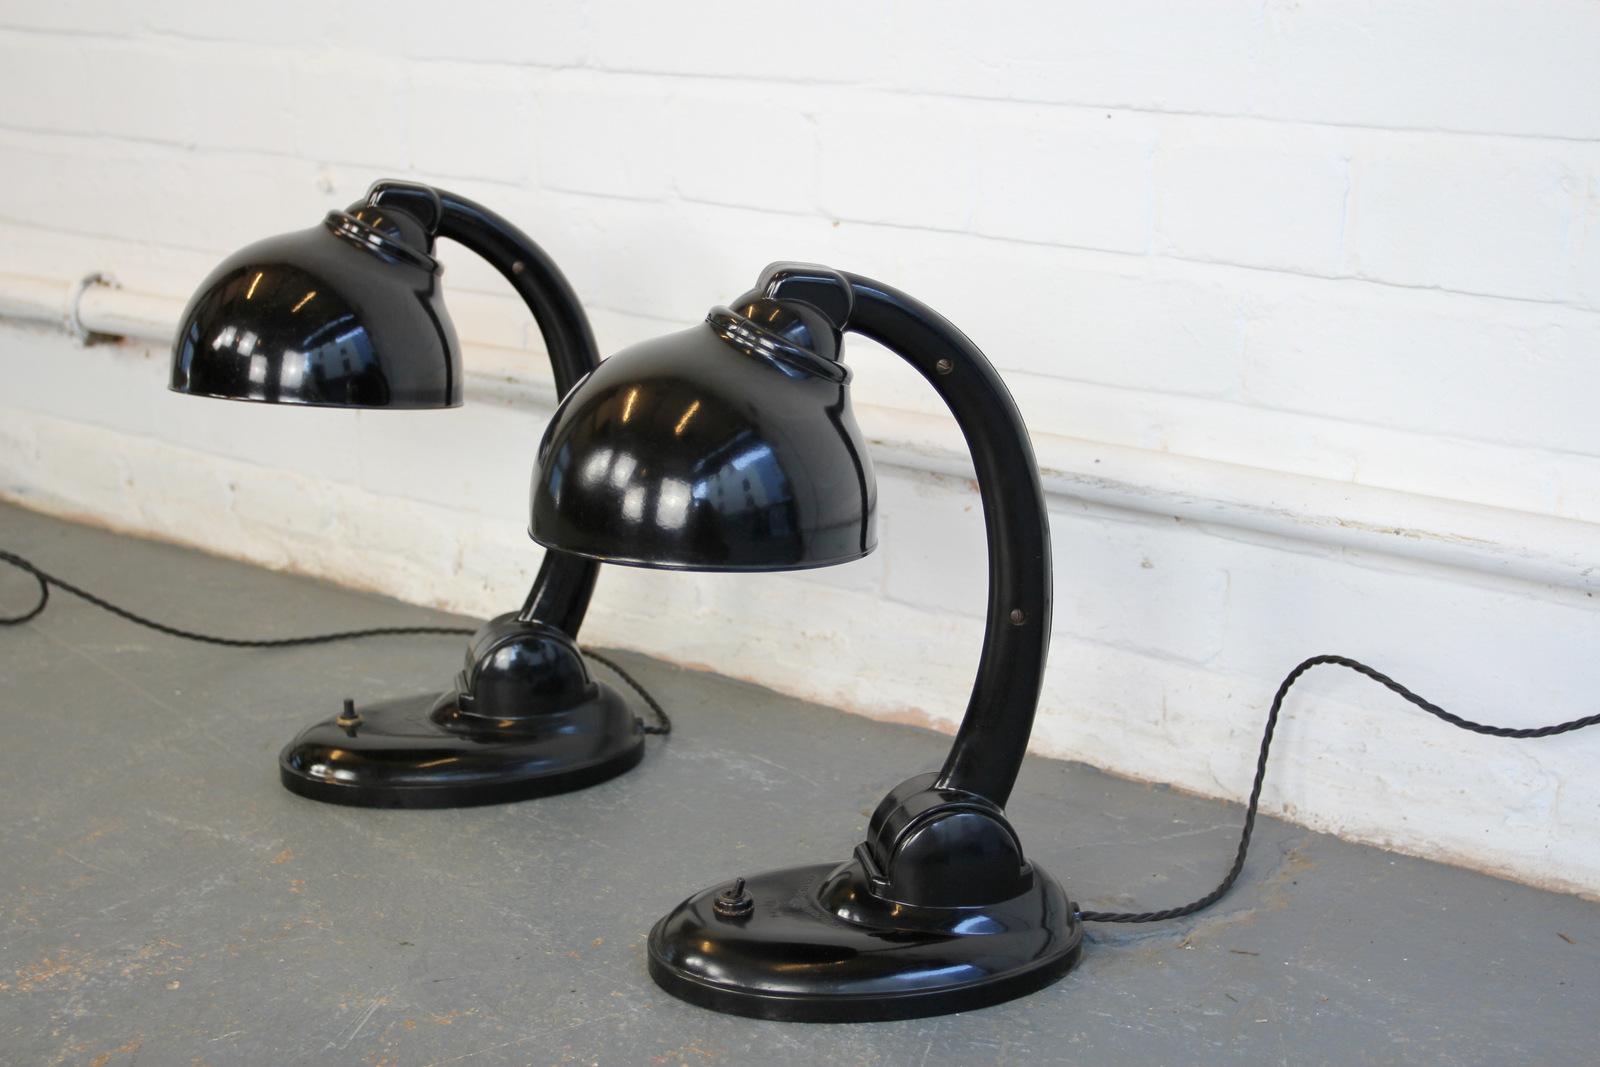 Model 11126 bakelite desk lamps by Eric Kirkman Cole, circa 1930s

- Price is per lamp (four available)
- Fully re-wired
- Original inline switches
- Bakelite shade and base
- Czech, circa 1930s
- Measures: 37 cm tall x 25 cm x 15 cm

Eric